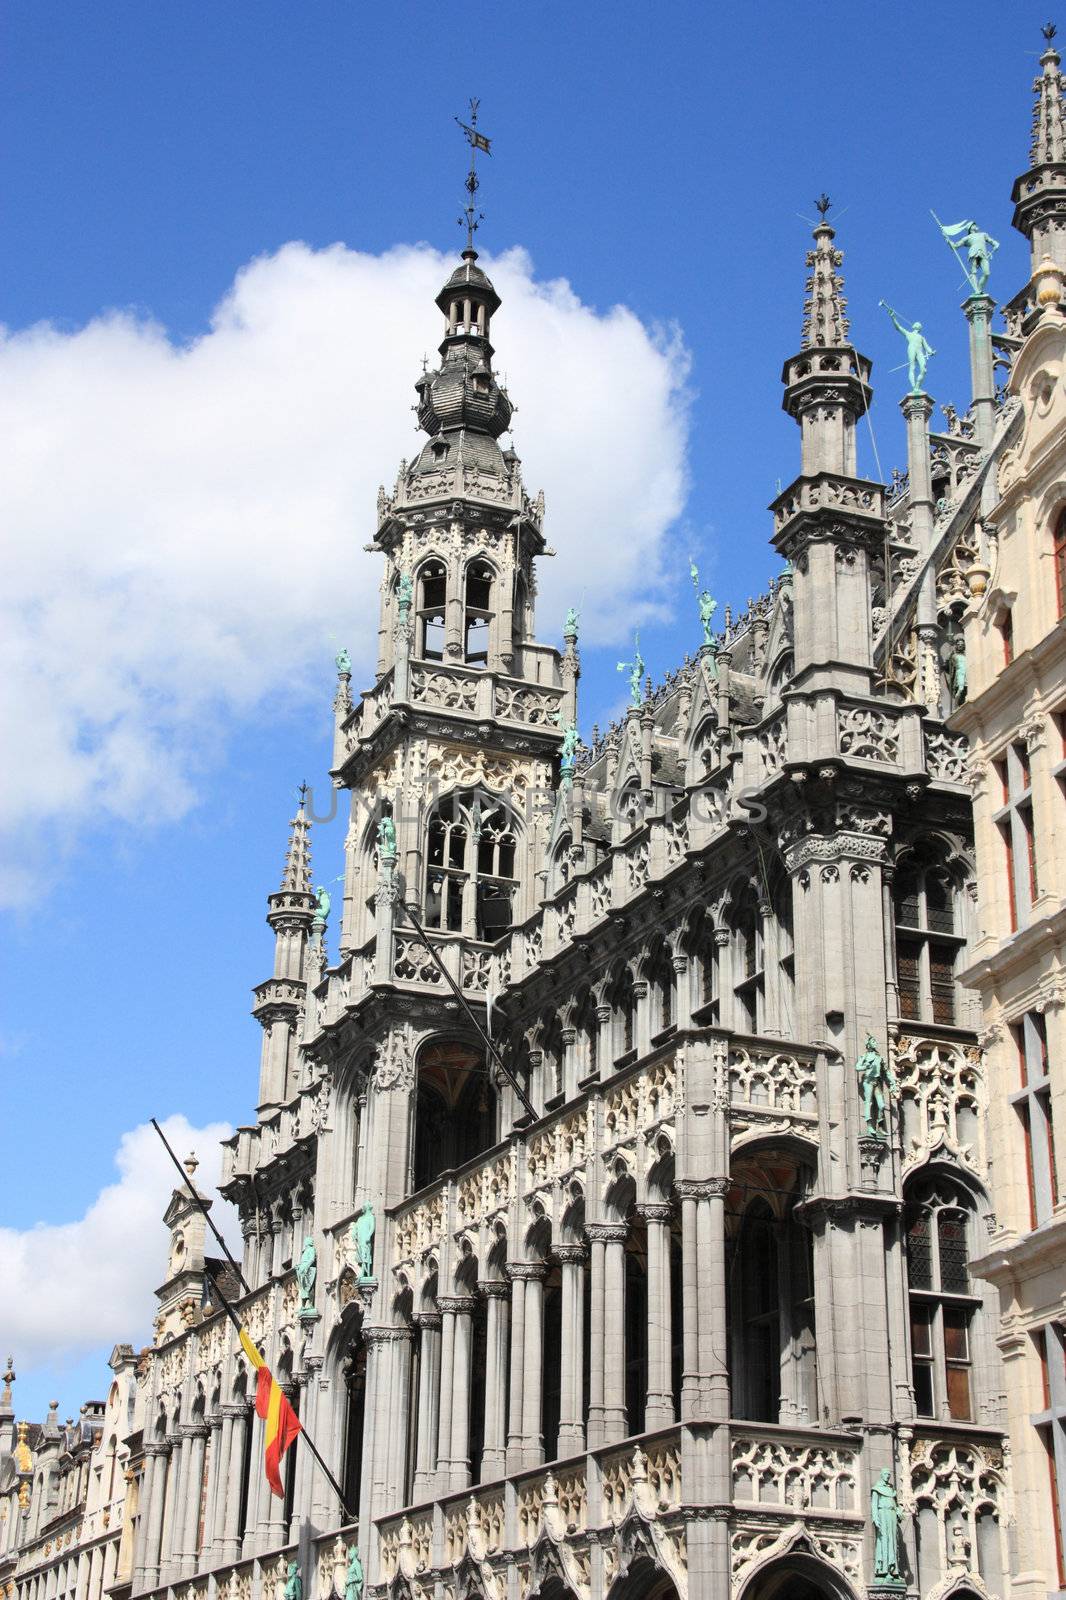 Brussels - Grand Place by tupungato